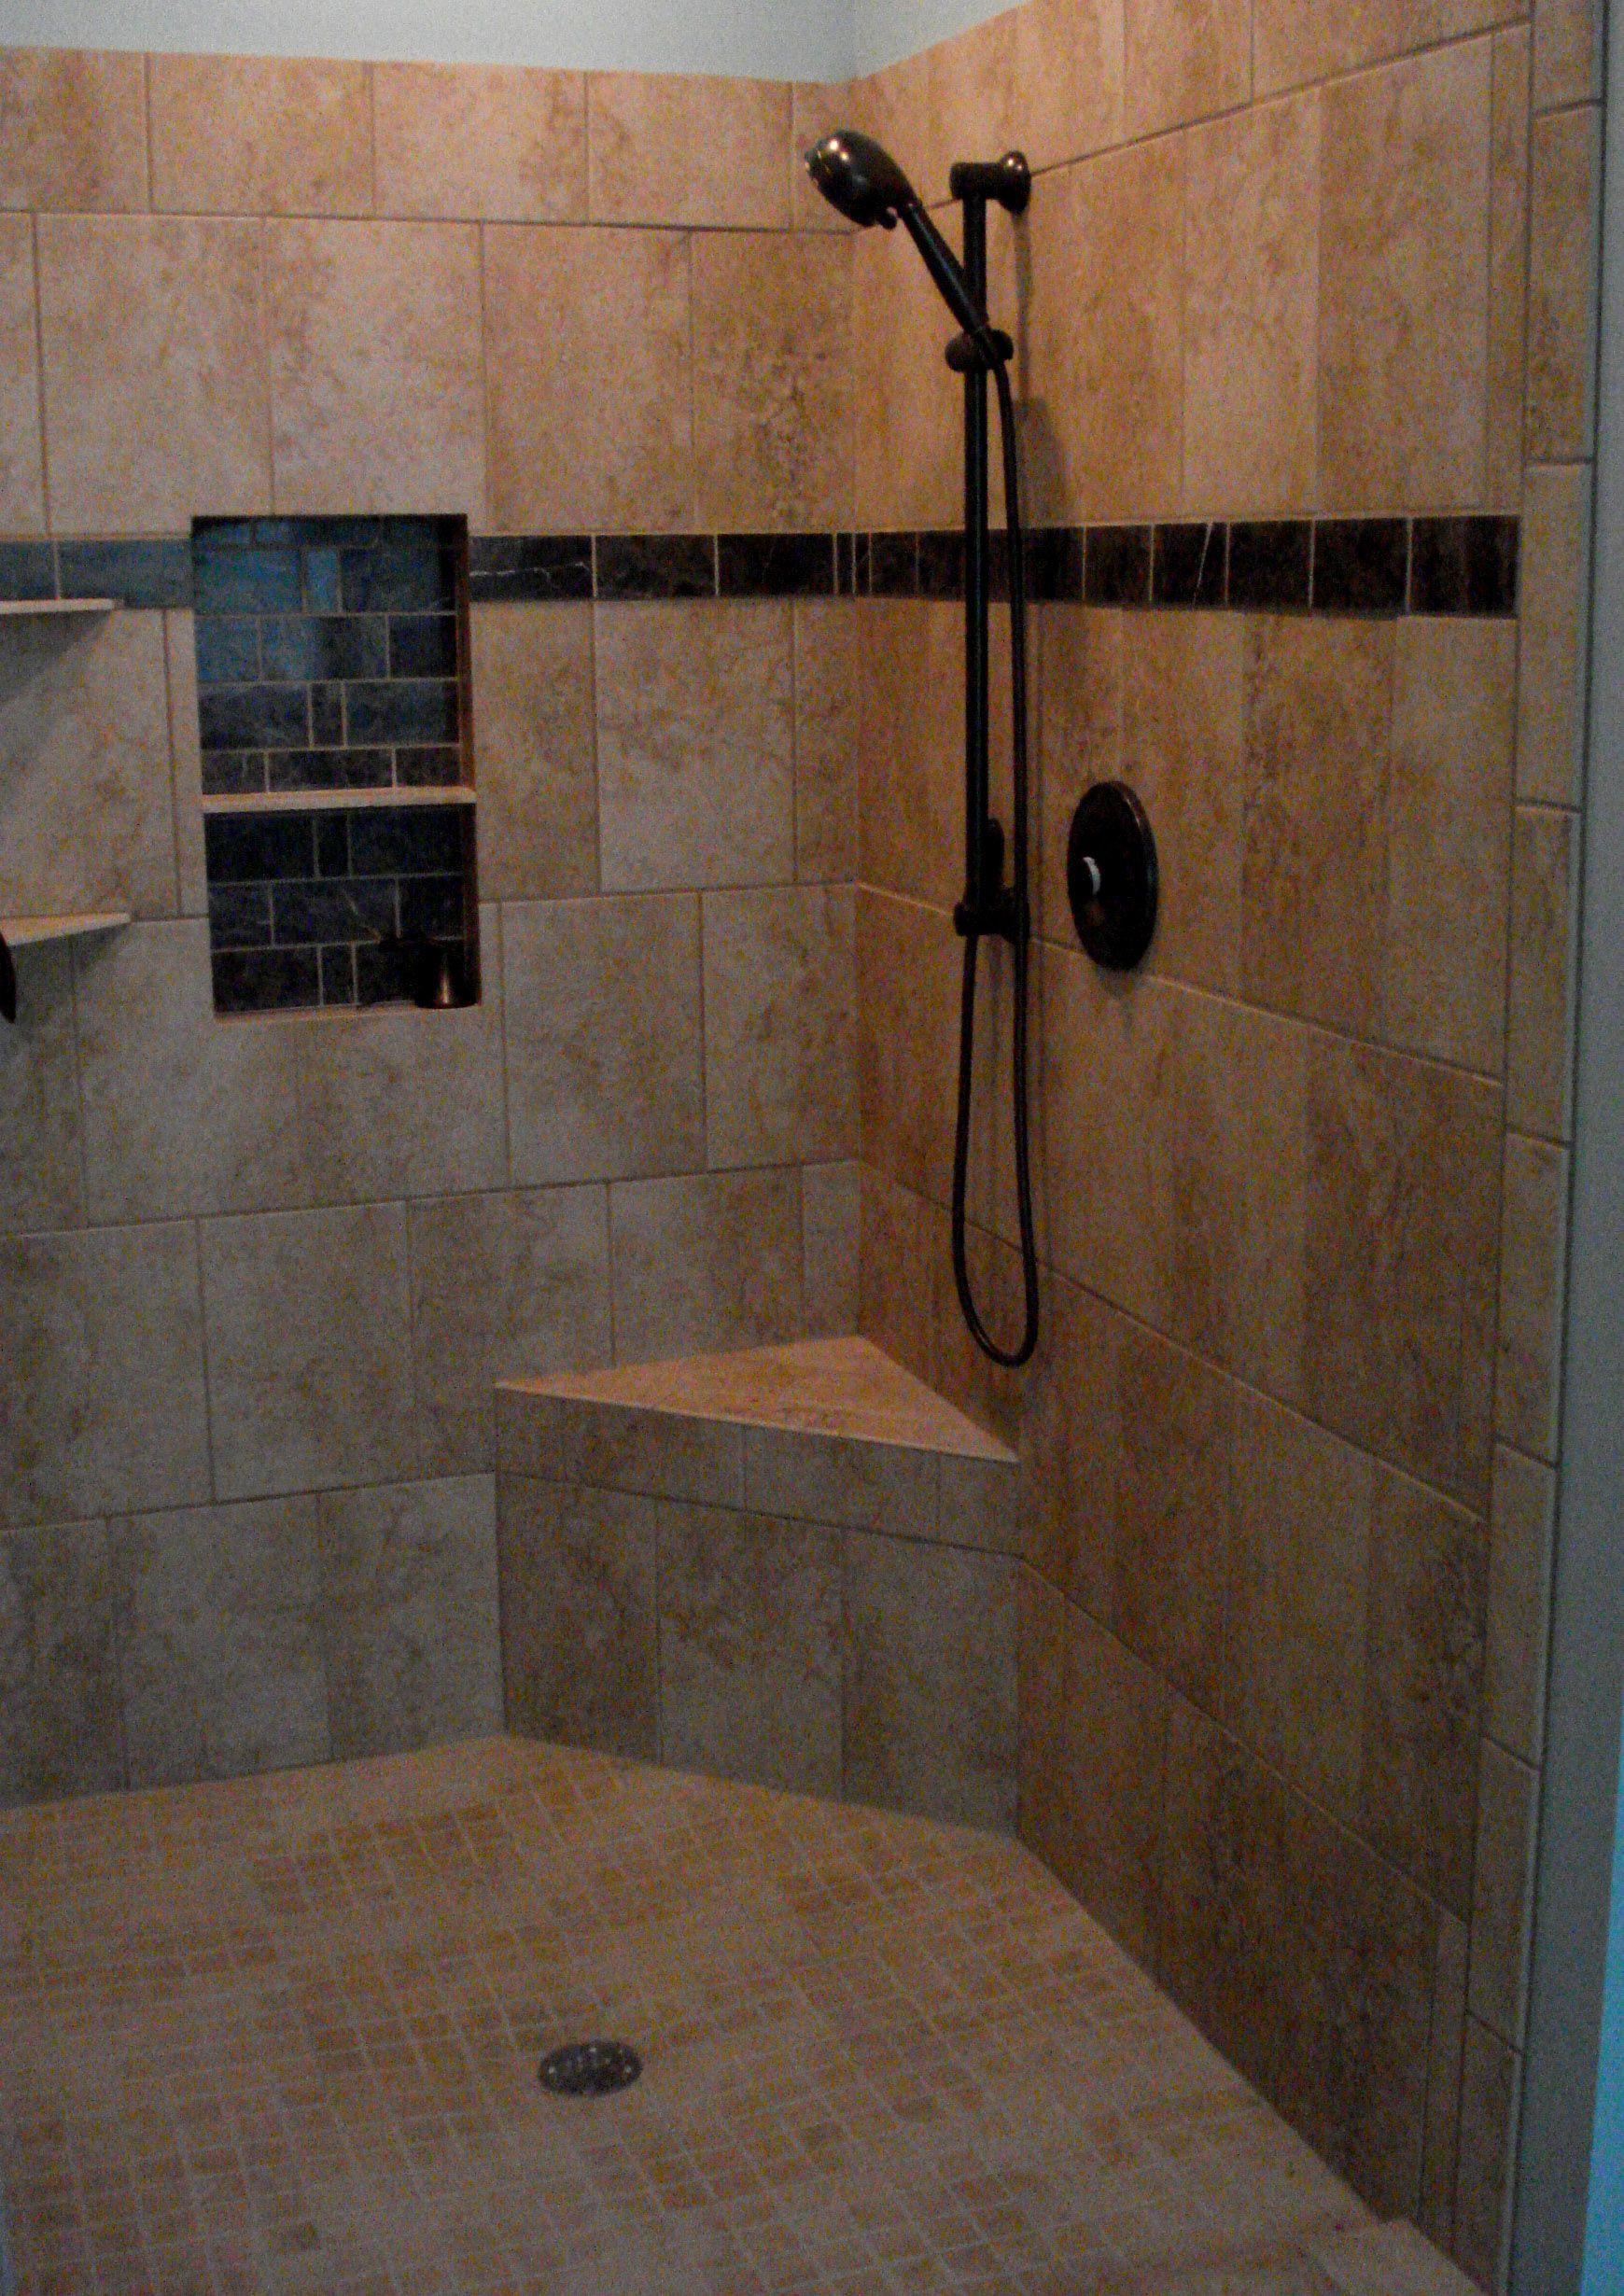 Bathroom and Shower Tile Ideas Beautiful Tile Shower Ideas Affecting the Appearance Of the Space